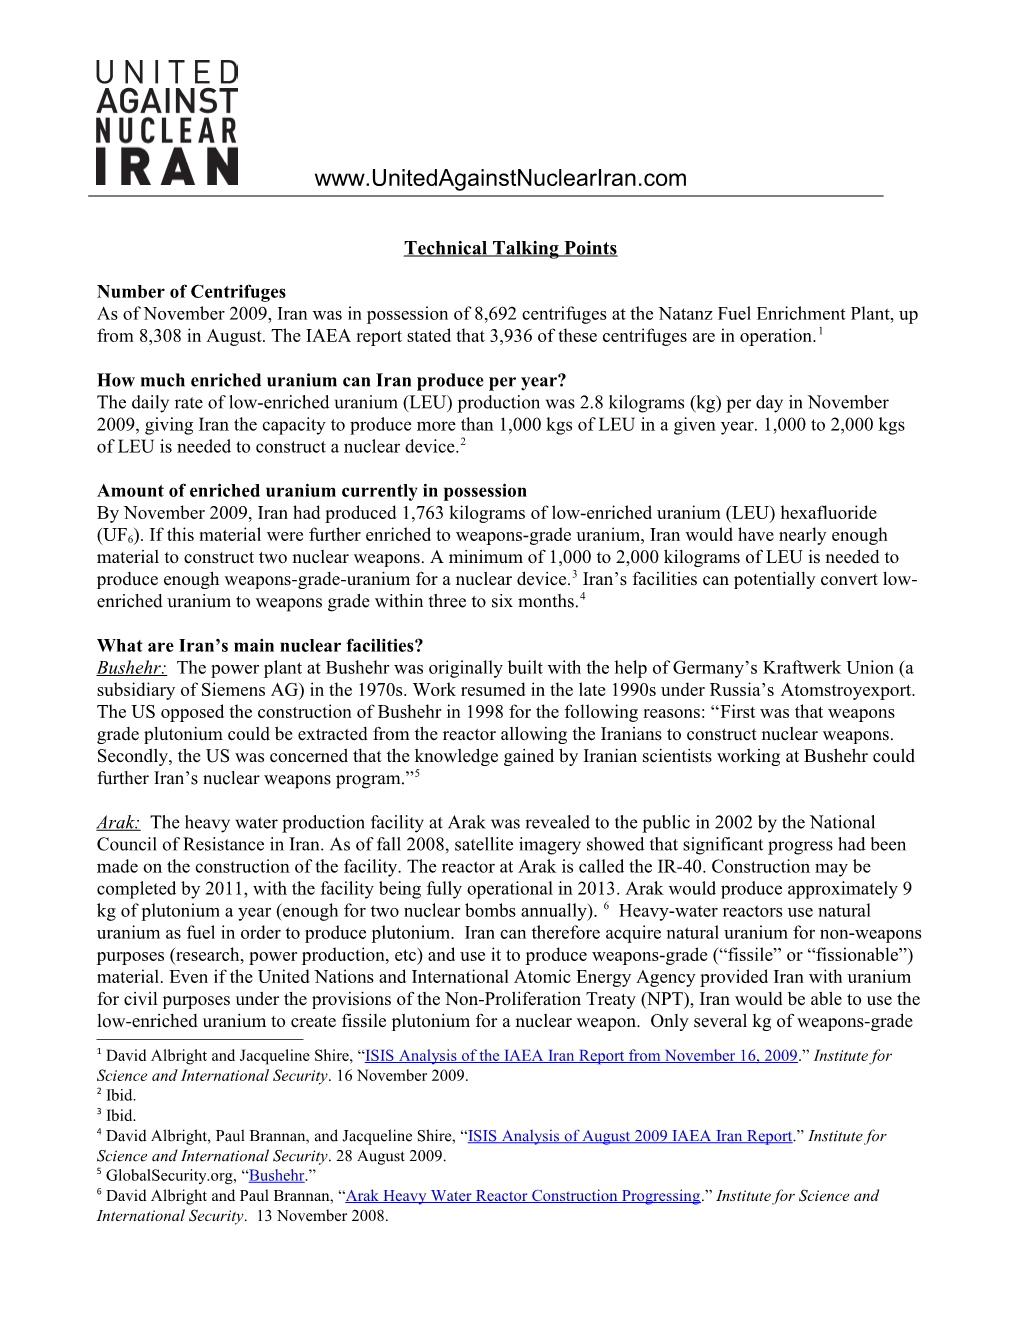 How Much Enriched Uranium Can Iran Produce Per Year?